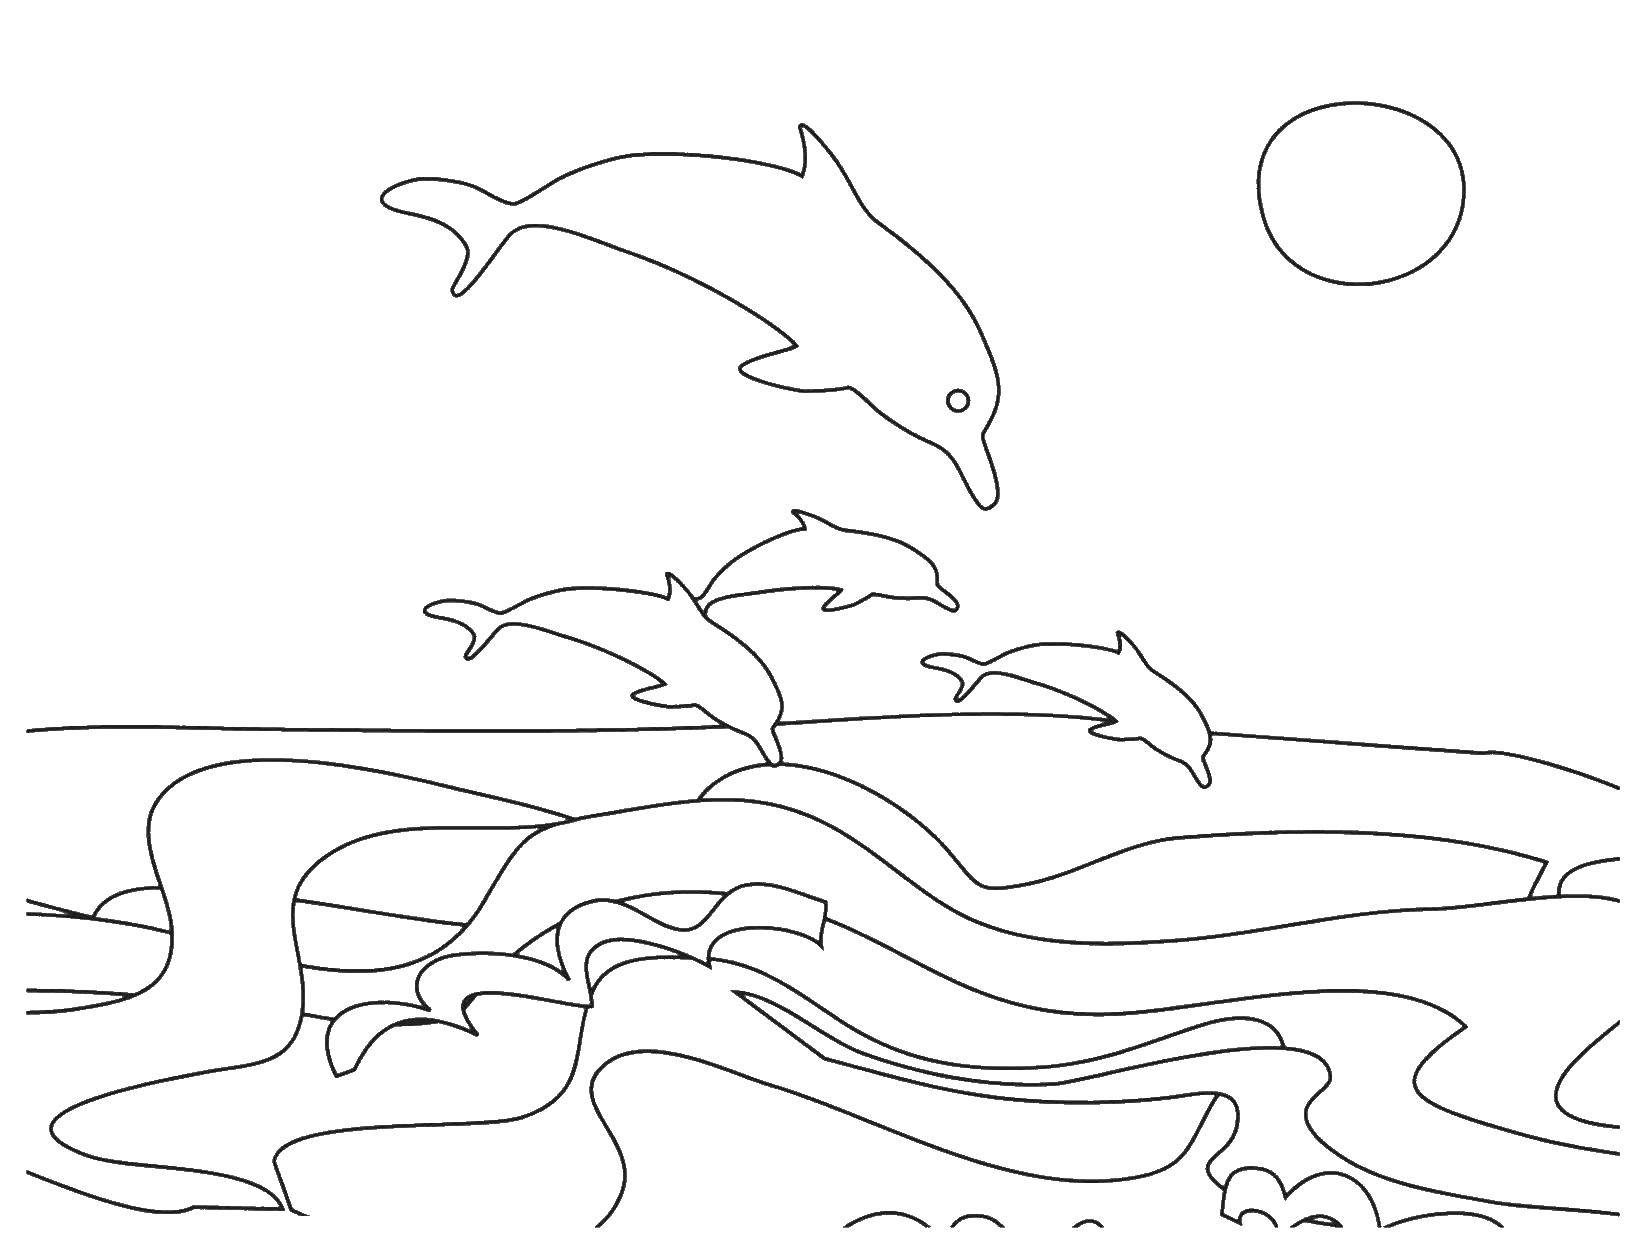 Coloring Dolphins jump out of the water. Category fish. Tags:  Fish, game, water, dolphins.